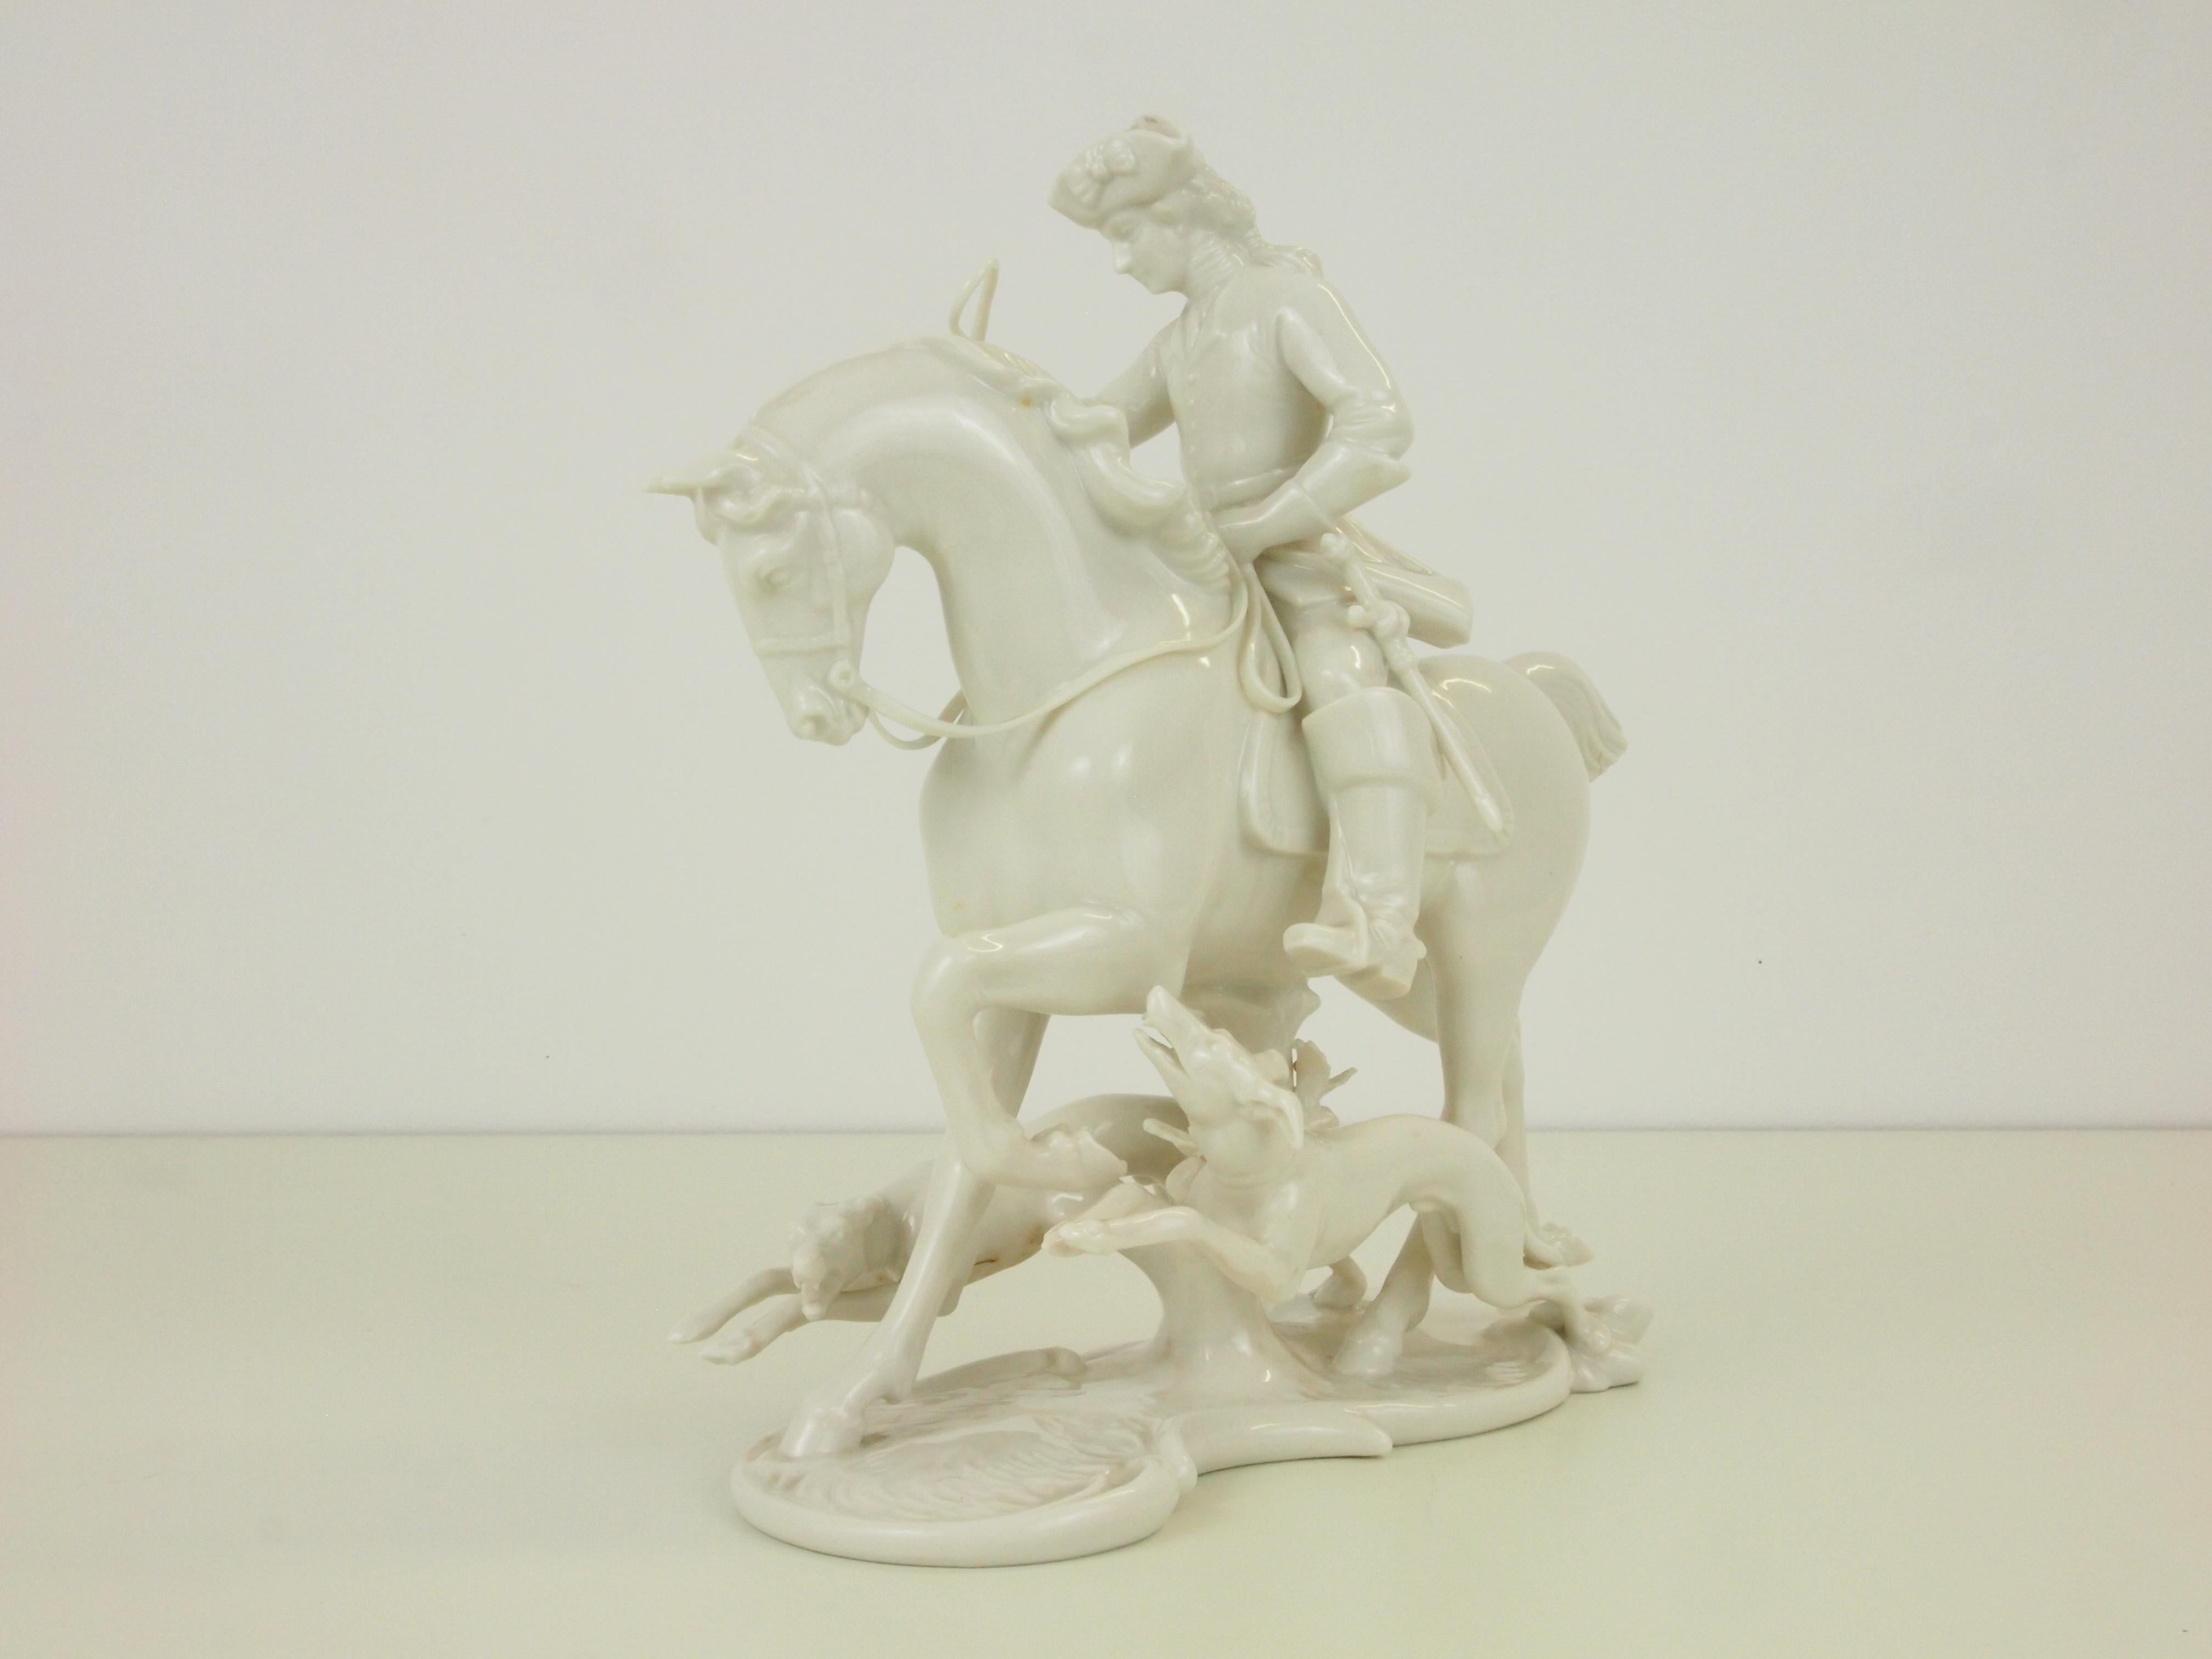 Nymphenburg Porcelain Figurine Depicting a Horse Rider in a Hunting Scene In Good Condition For Sale In Hilversum, Noord Holland